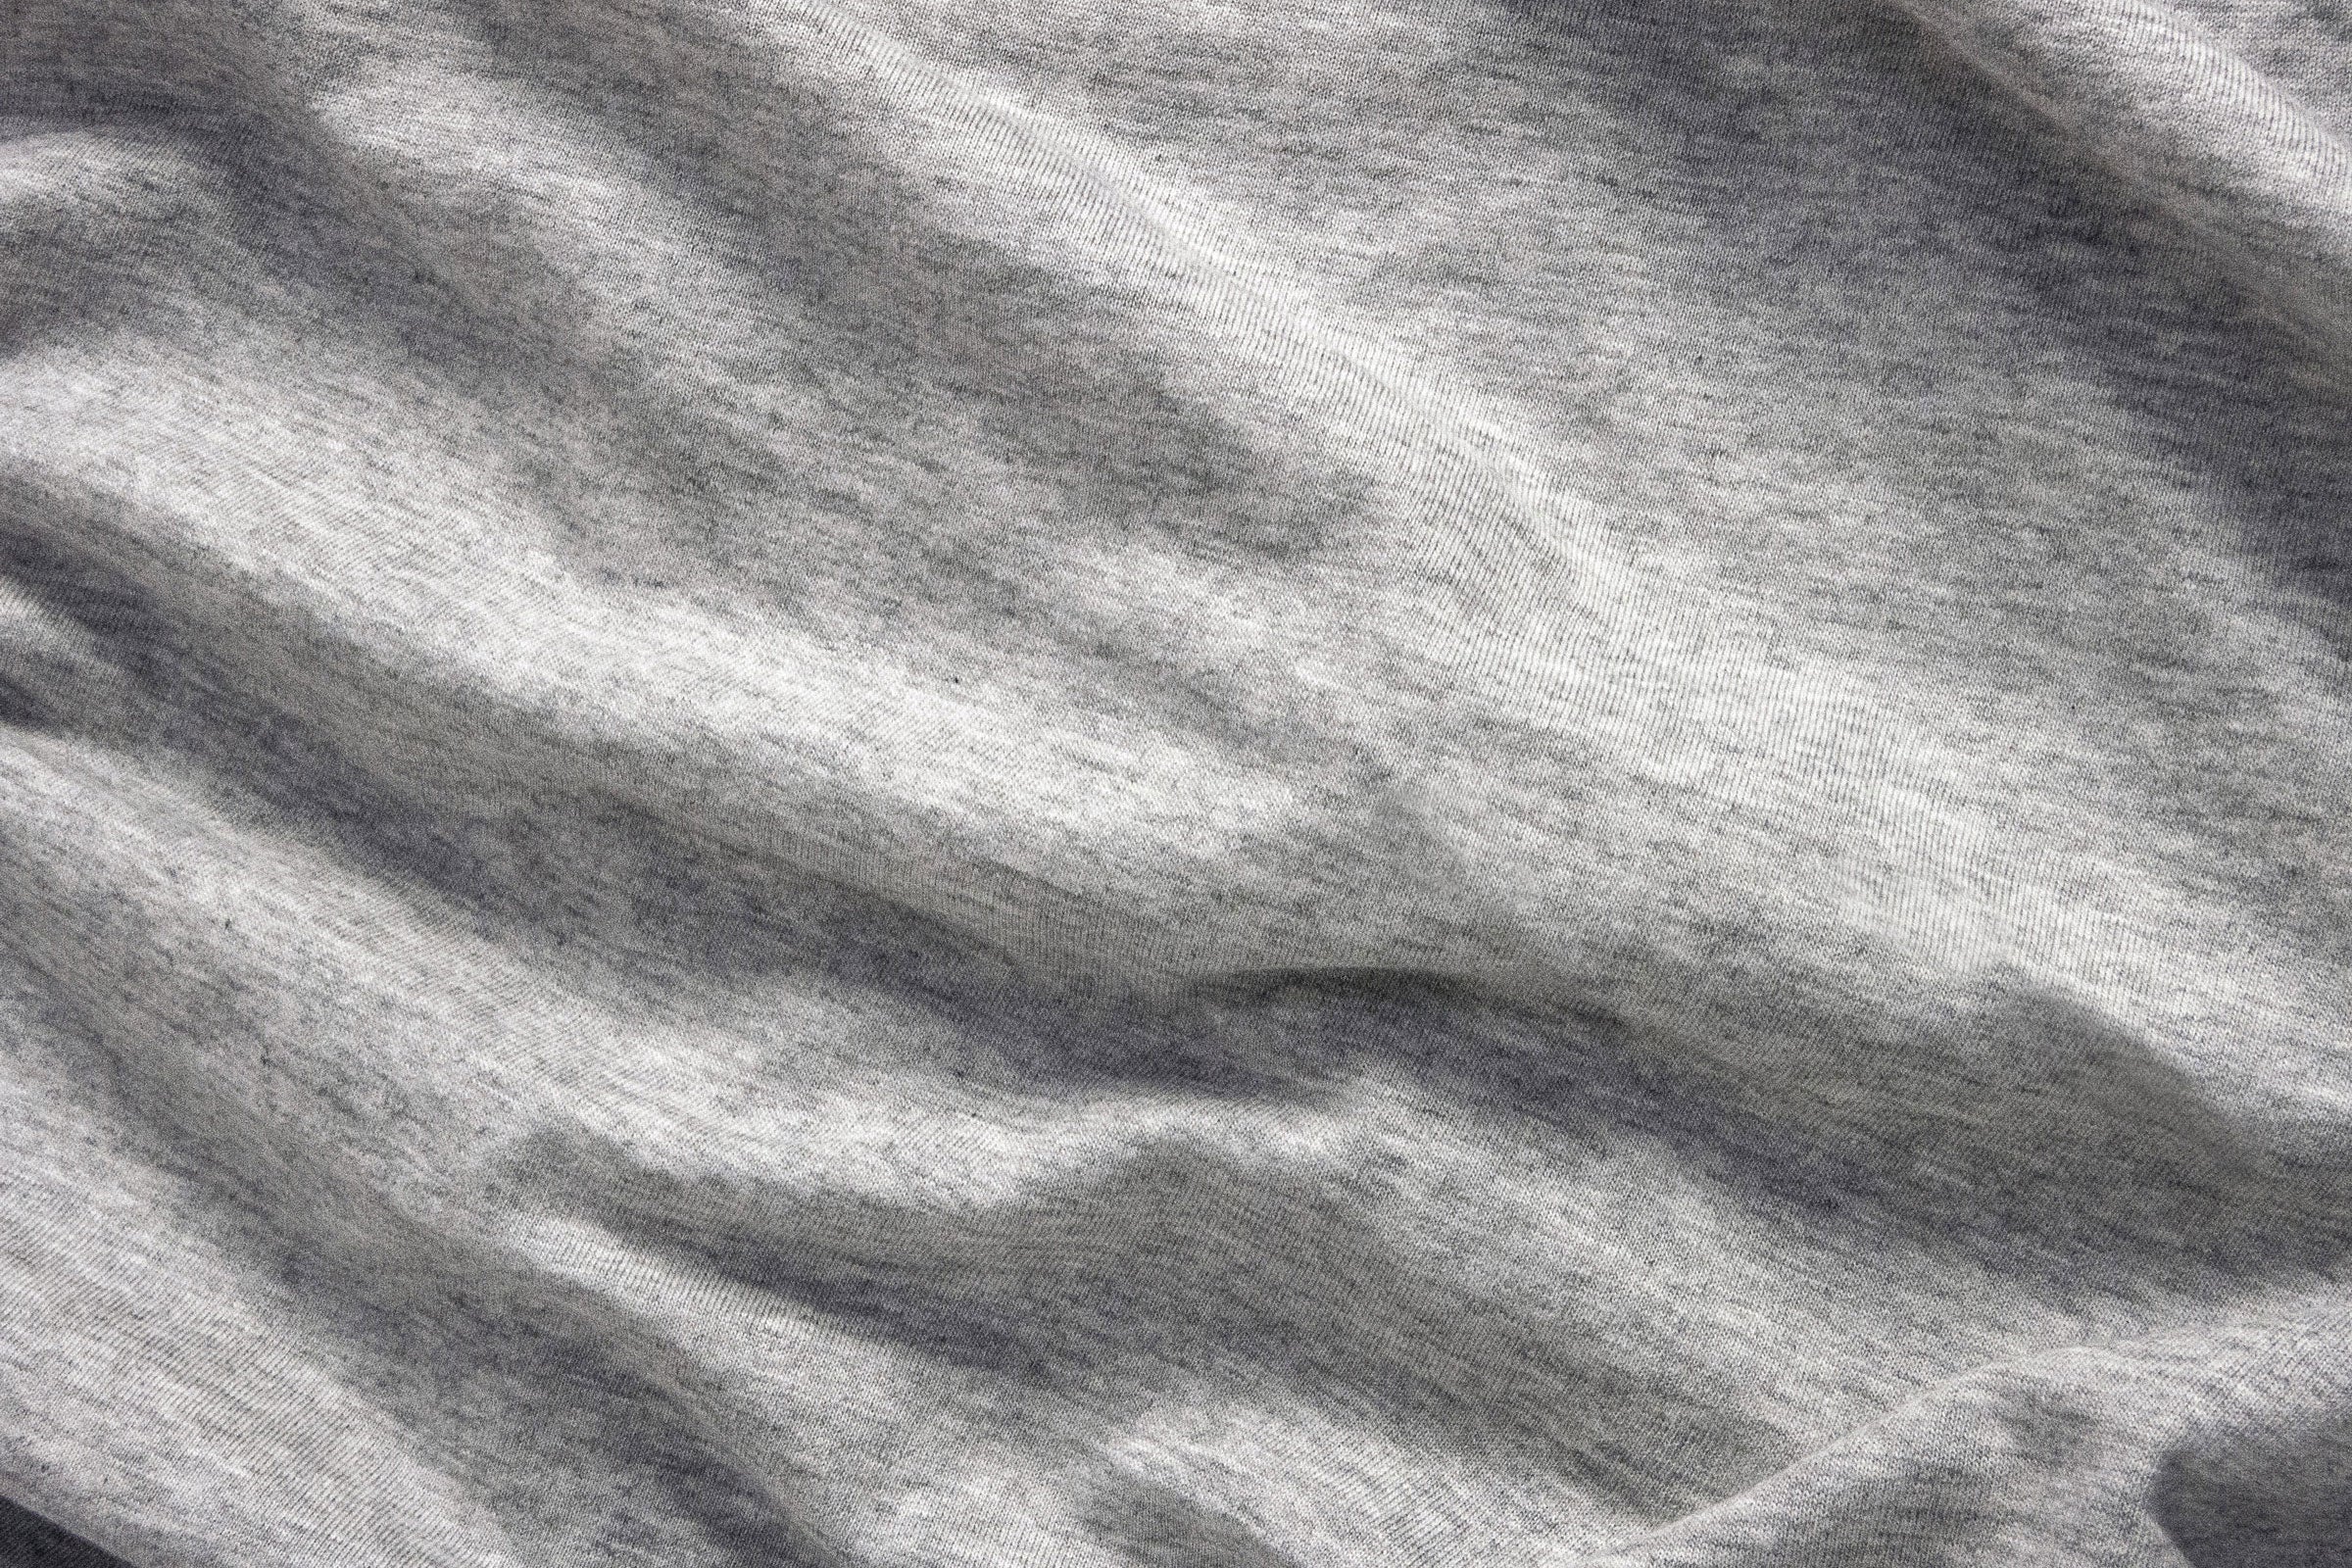 jersey-pebble-duvet-cover-close-up-shot-by-sojao.jpg